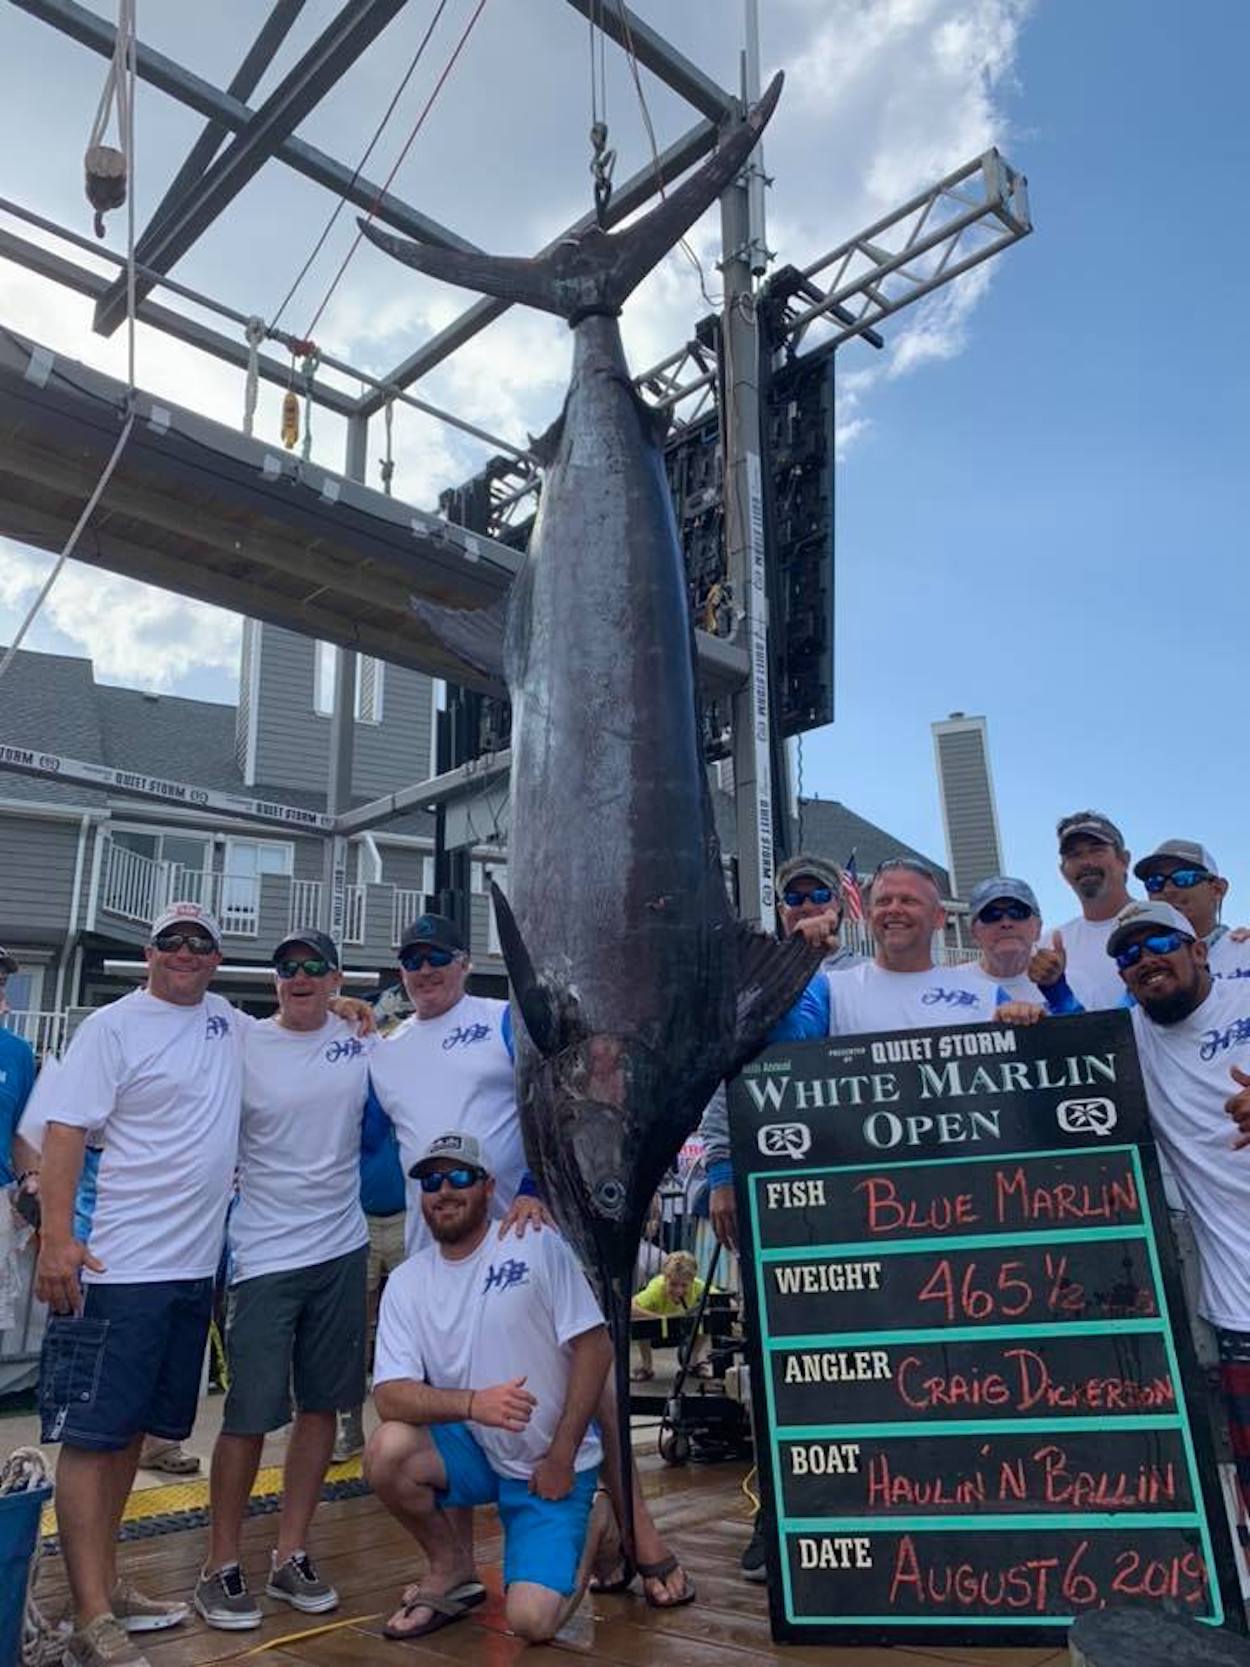 Blue Marlin Hits the Board on Day 2 of the 46th Annual White Marlin Open